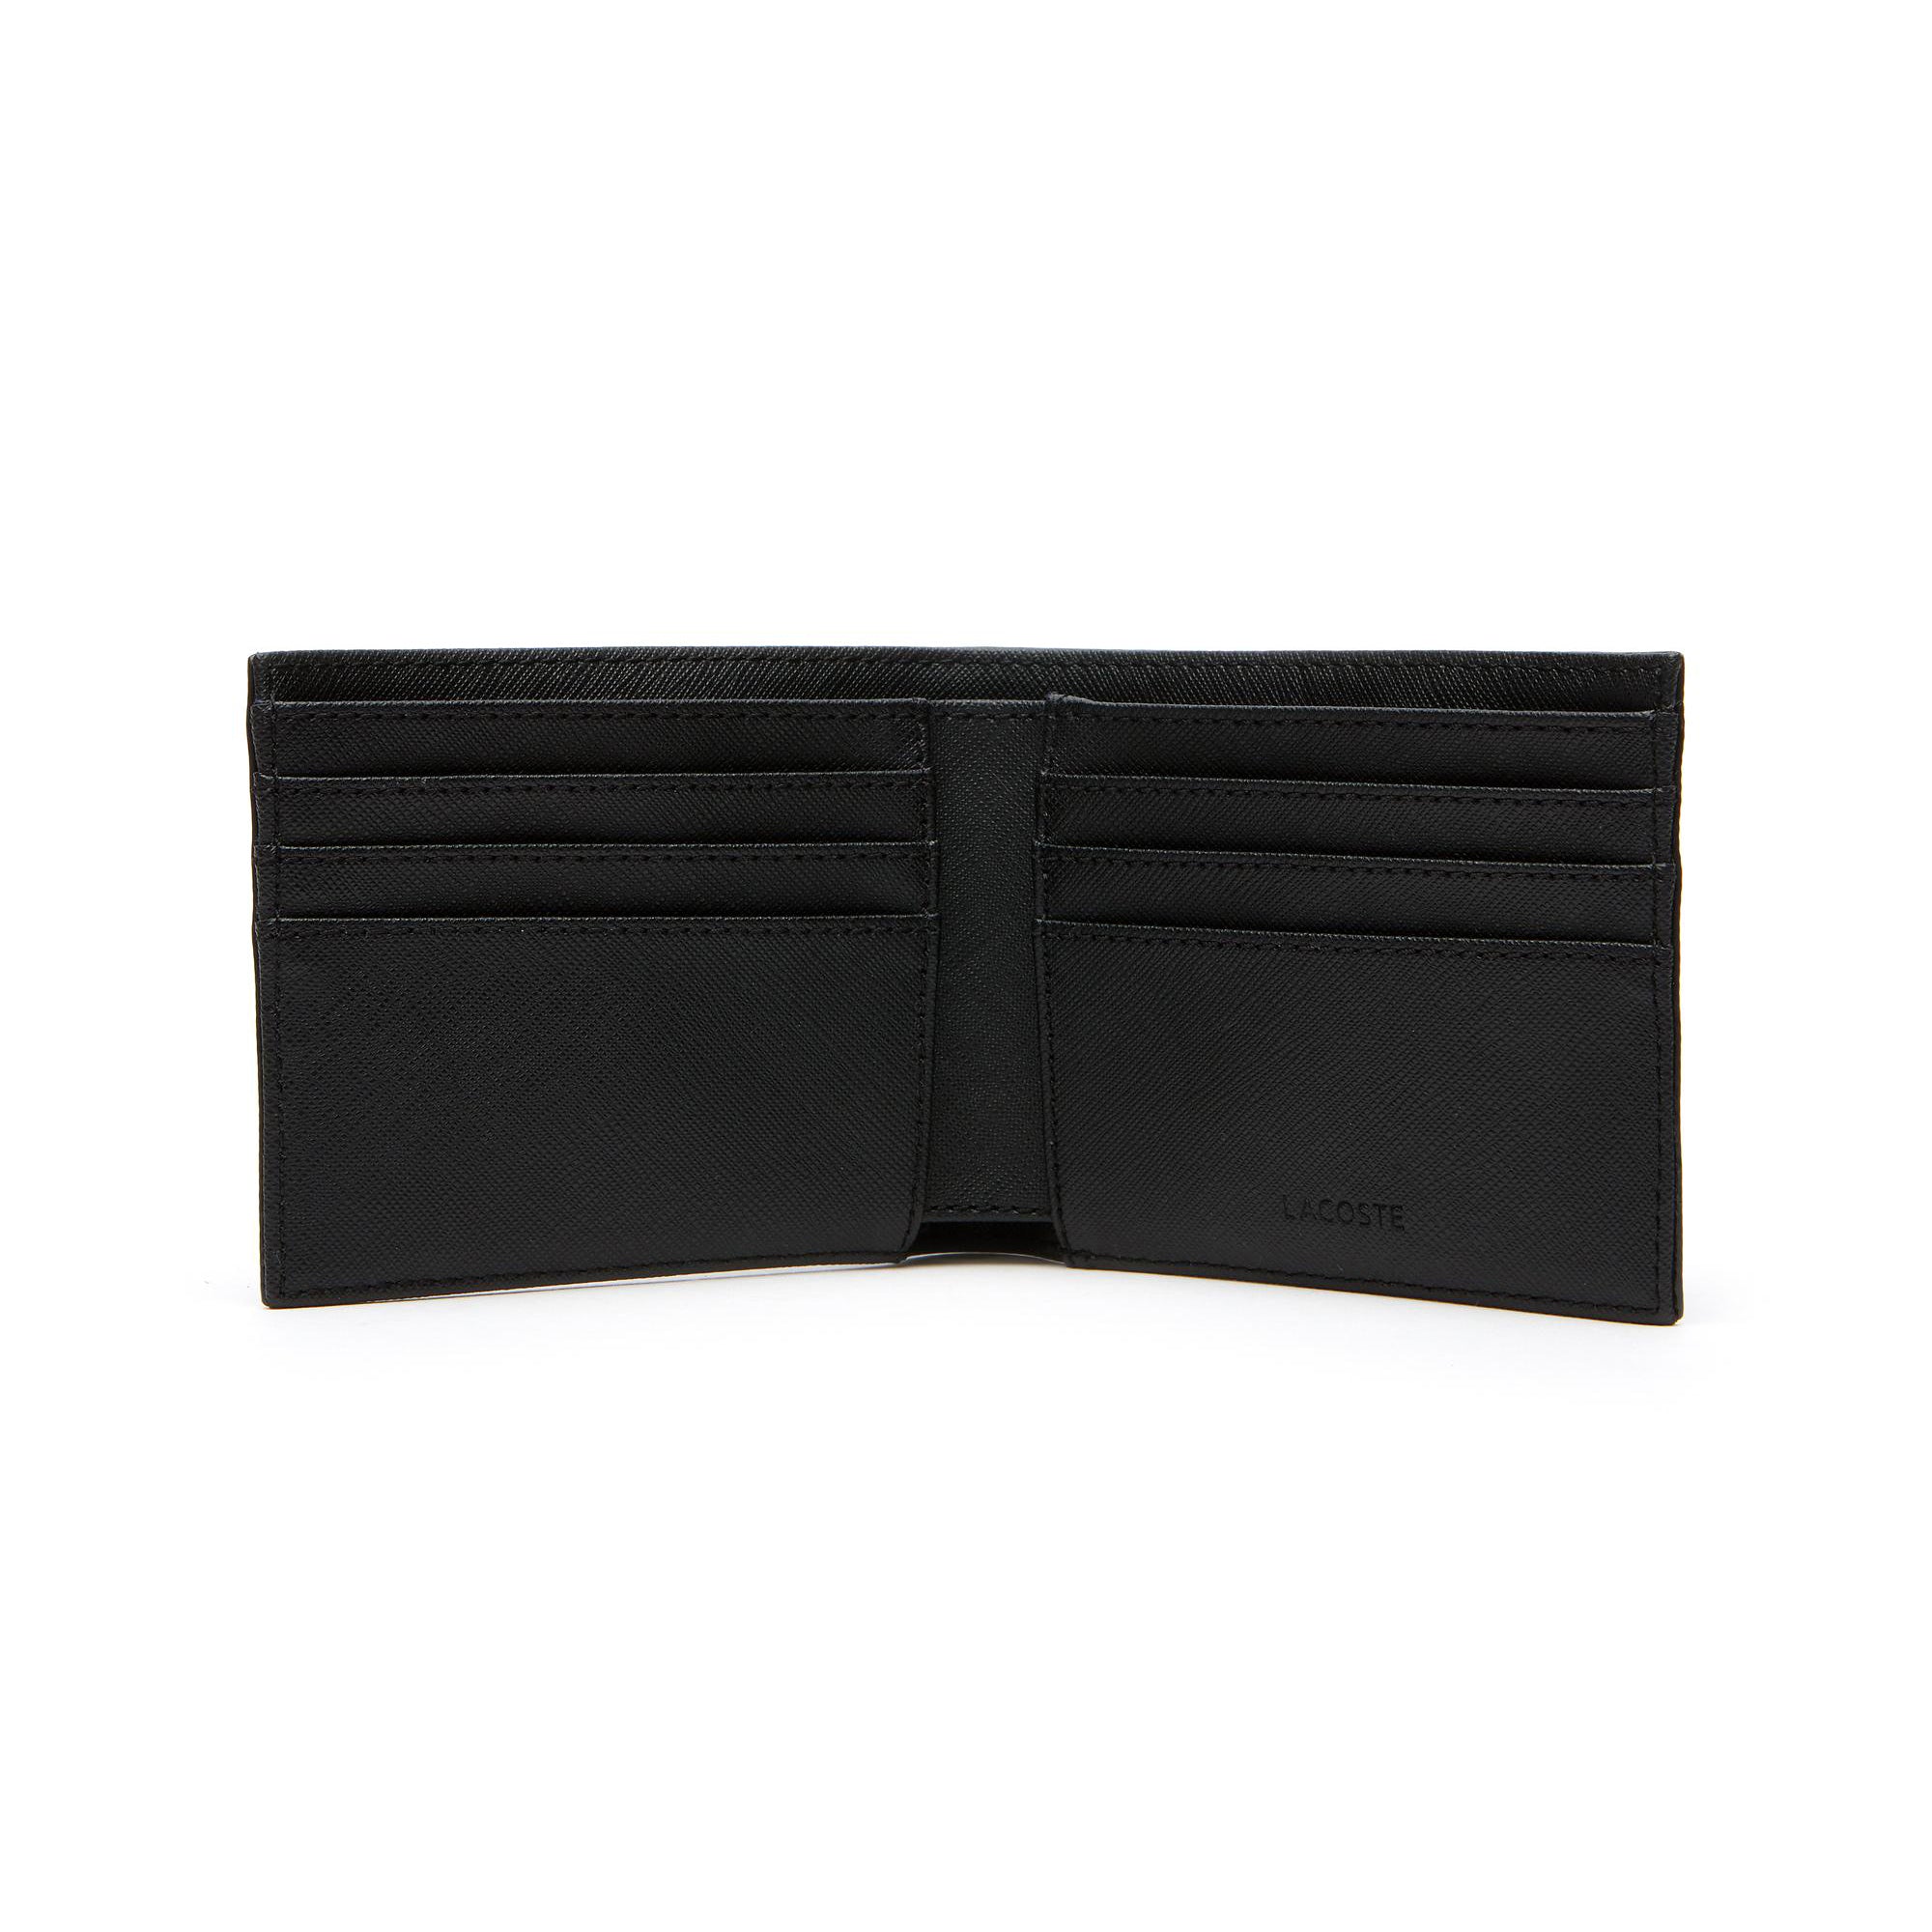 lacoste-classic-card-wallet-nh2308hc-black-000